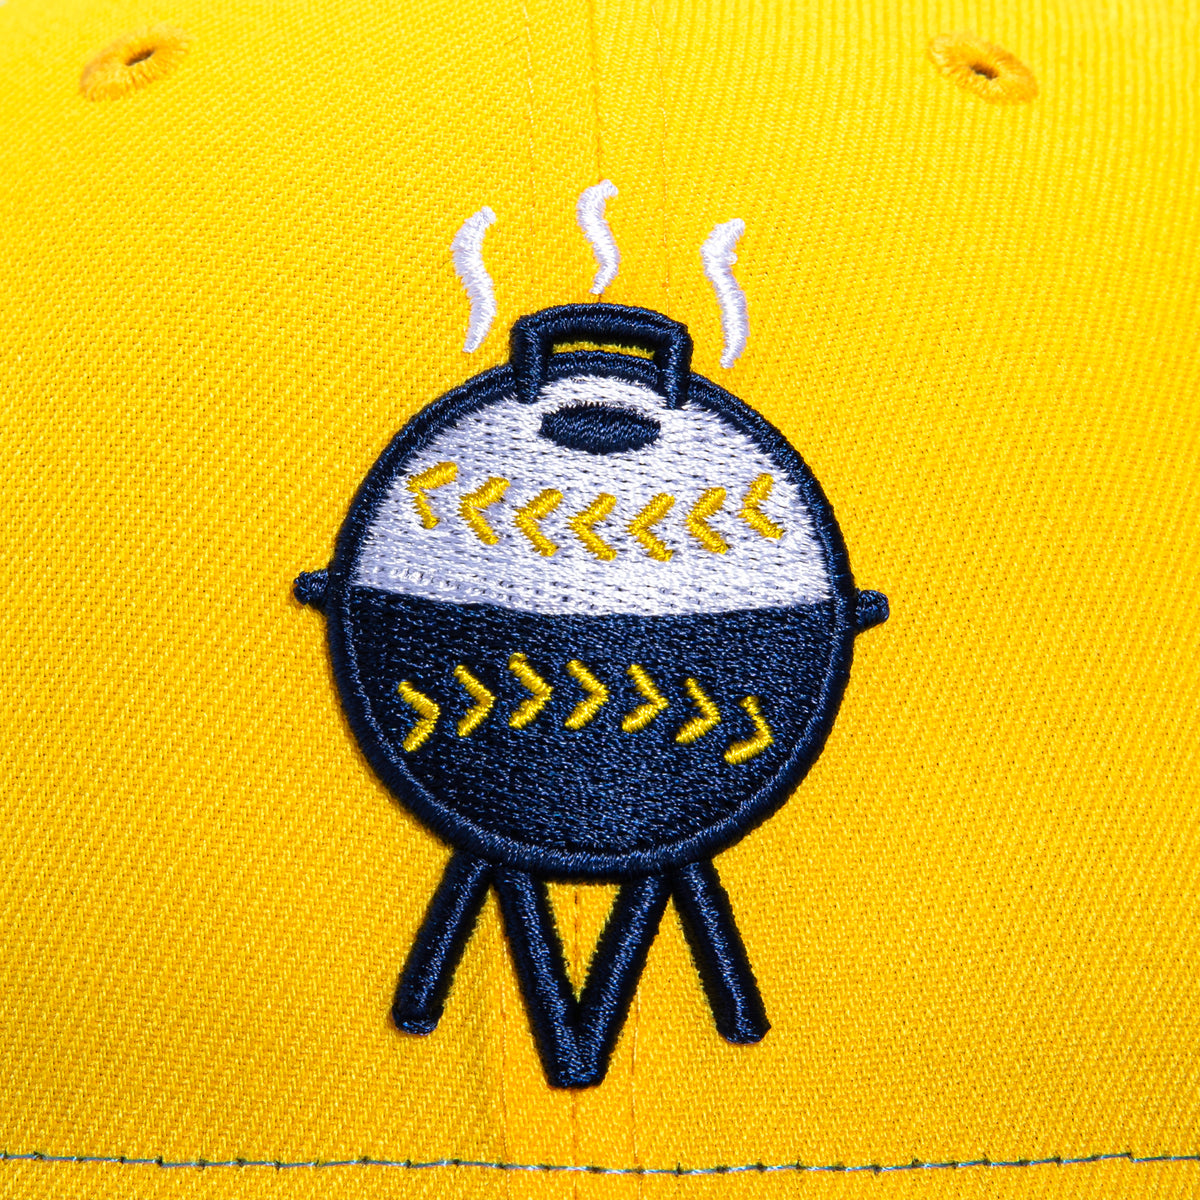 brewers grill patch hat